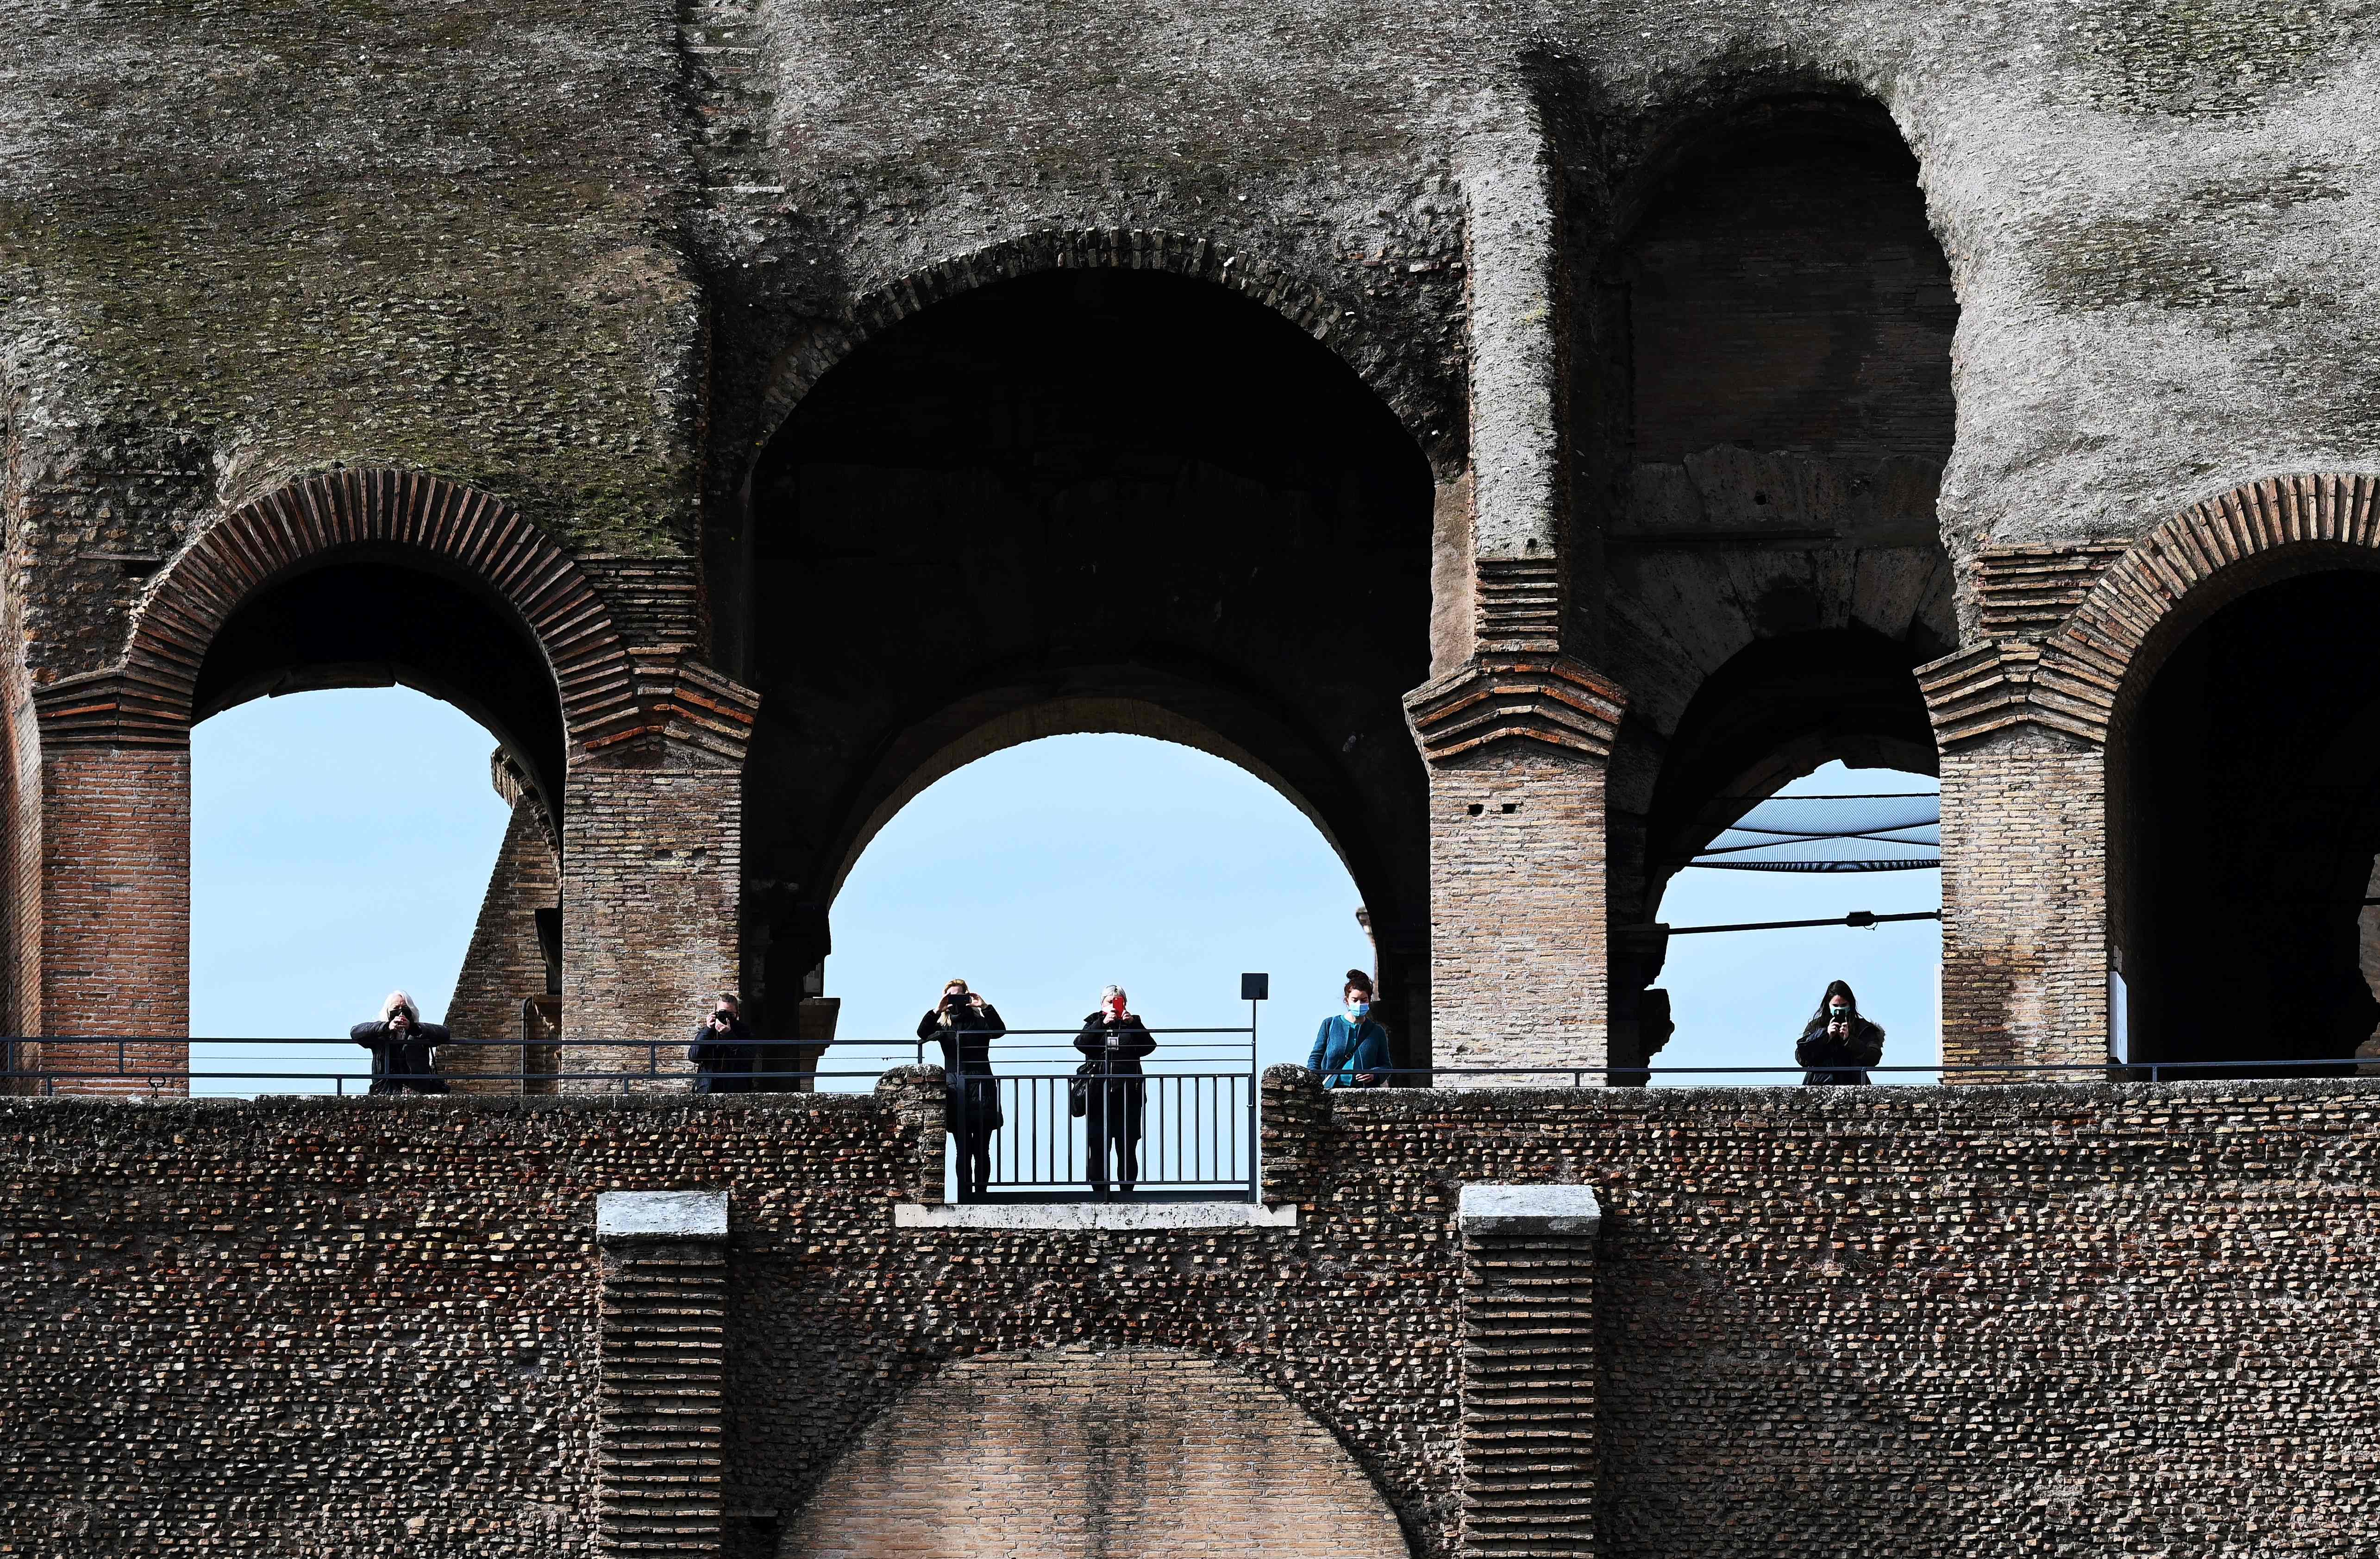 People visit Rome’s Colosseum after its reopening earlier this month